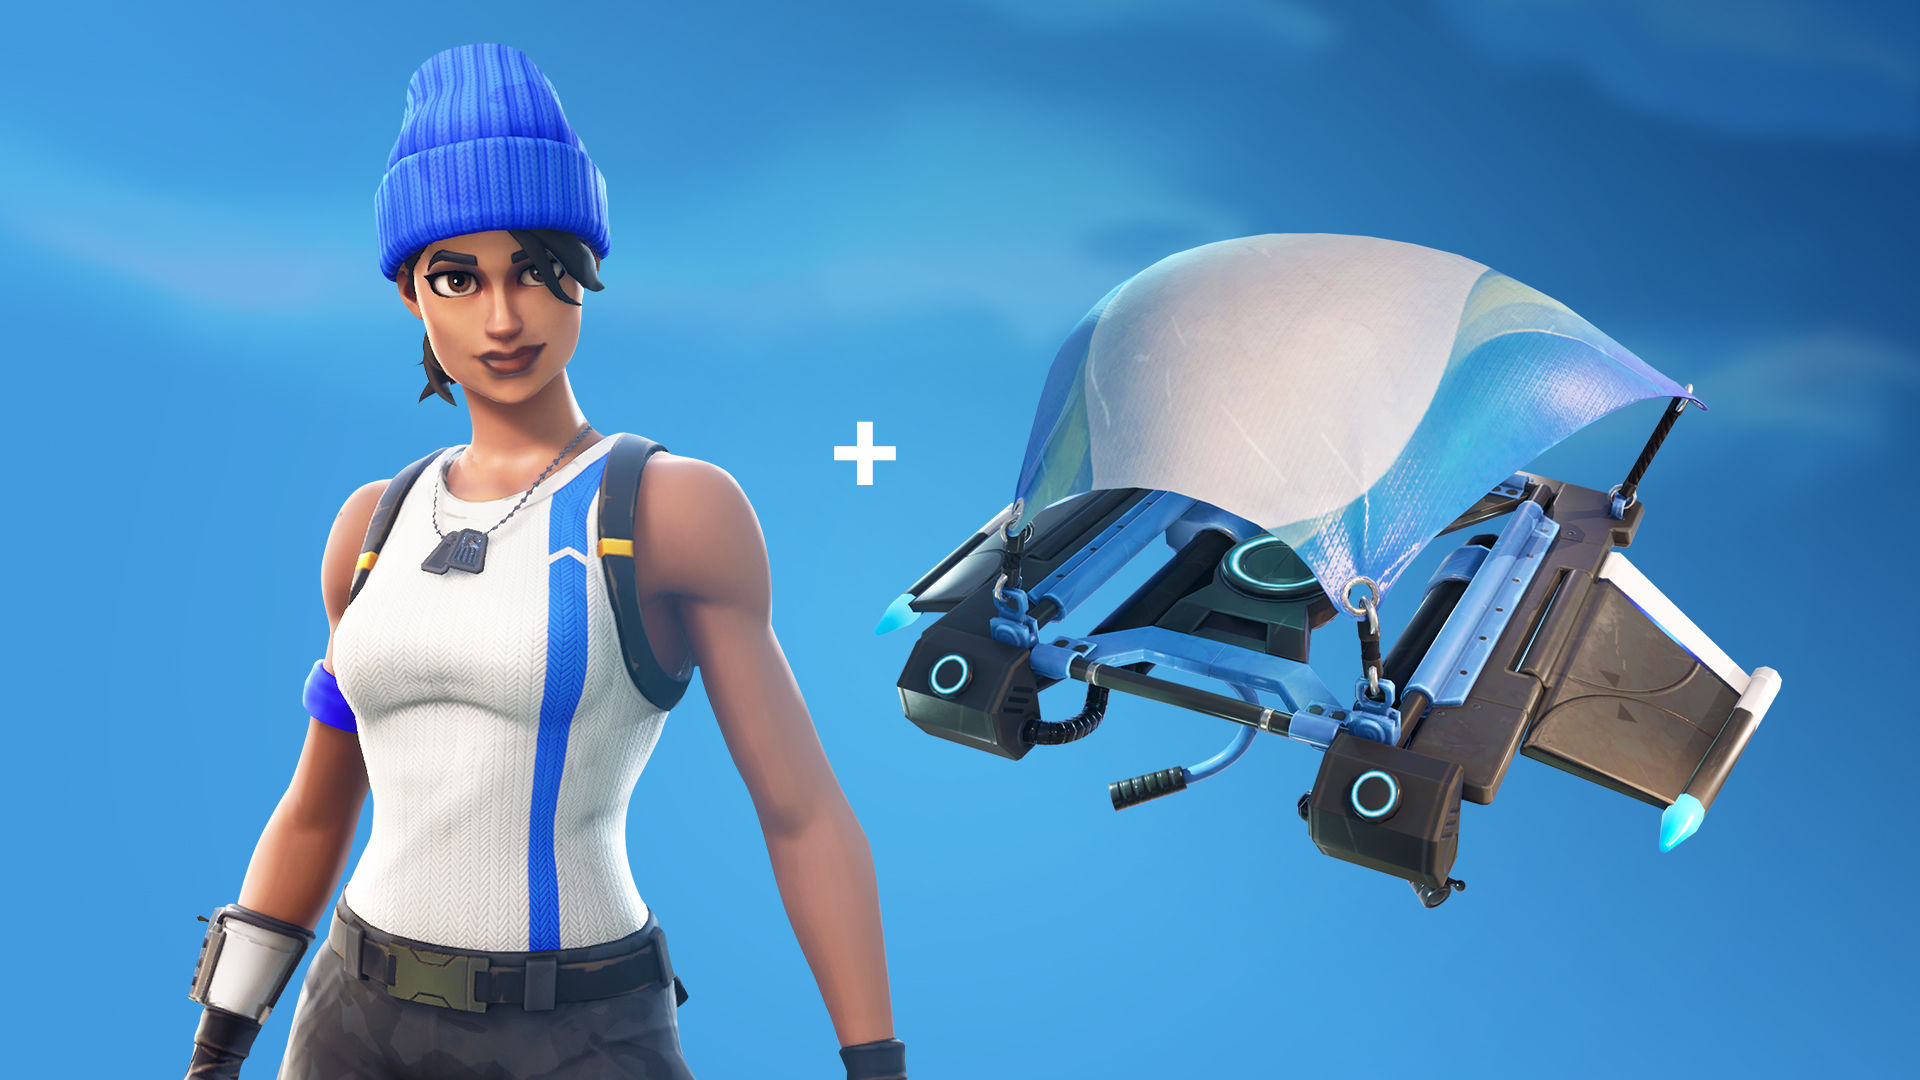 Free Ps Plus Costumes Impulse Grenades And More Has Arrived In Fortnite Battle Royale After Today S Big Update Gamesradar